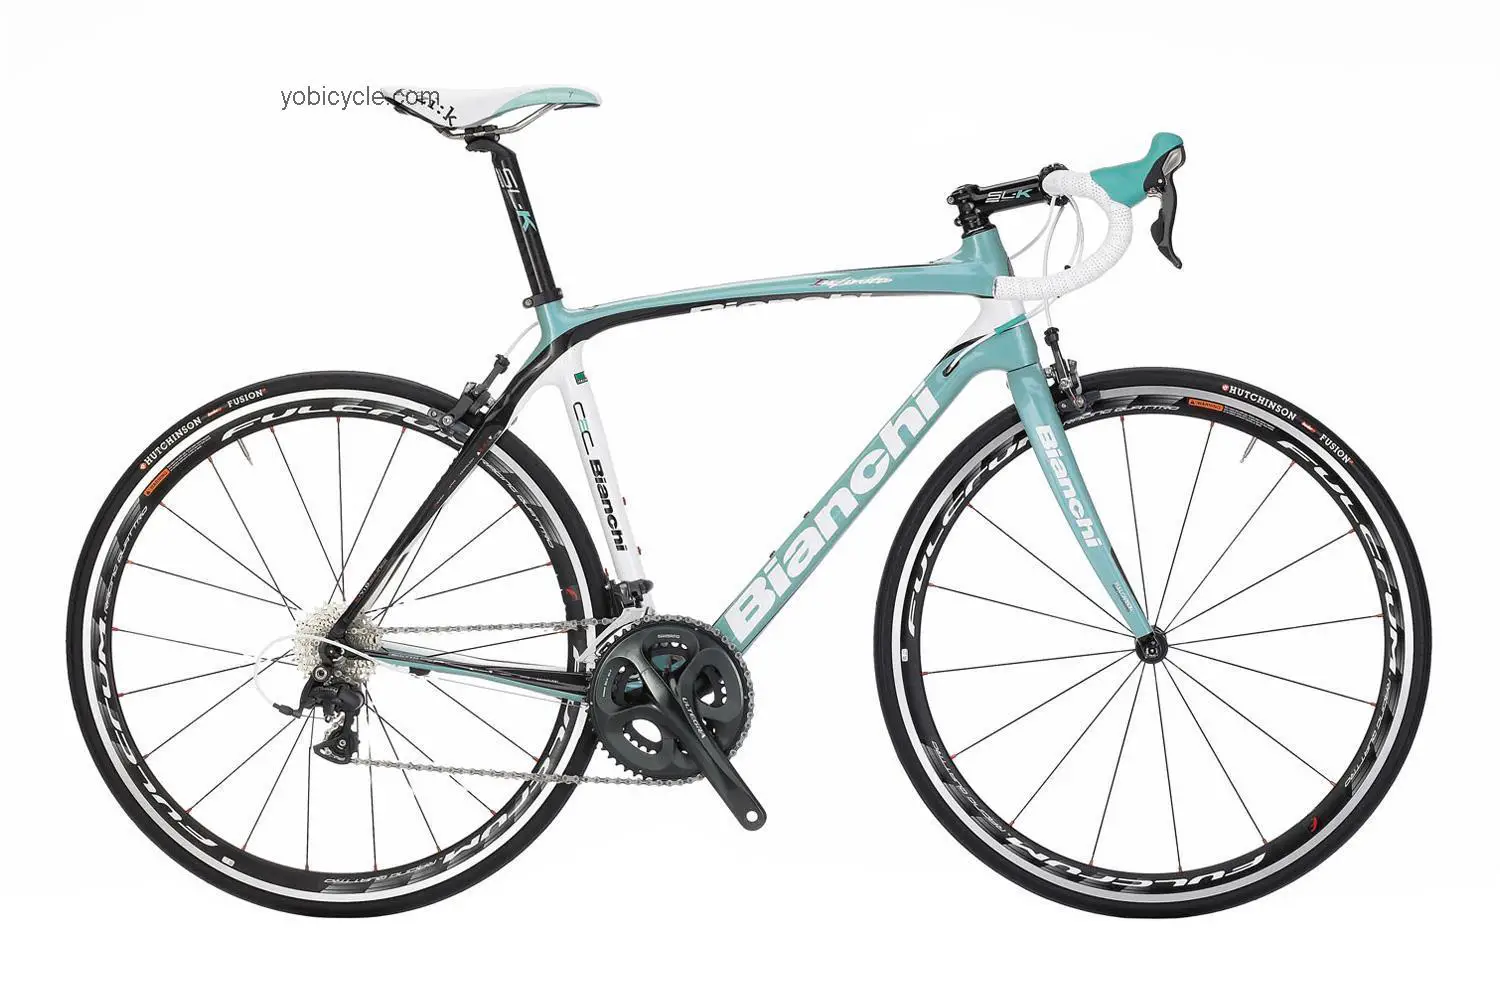 Bianchi Infinito Ultegra competitors and comparison tool online specs and performance